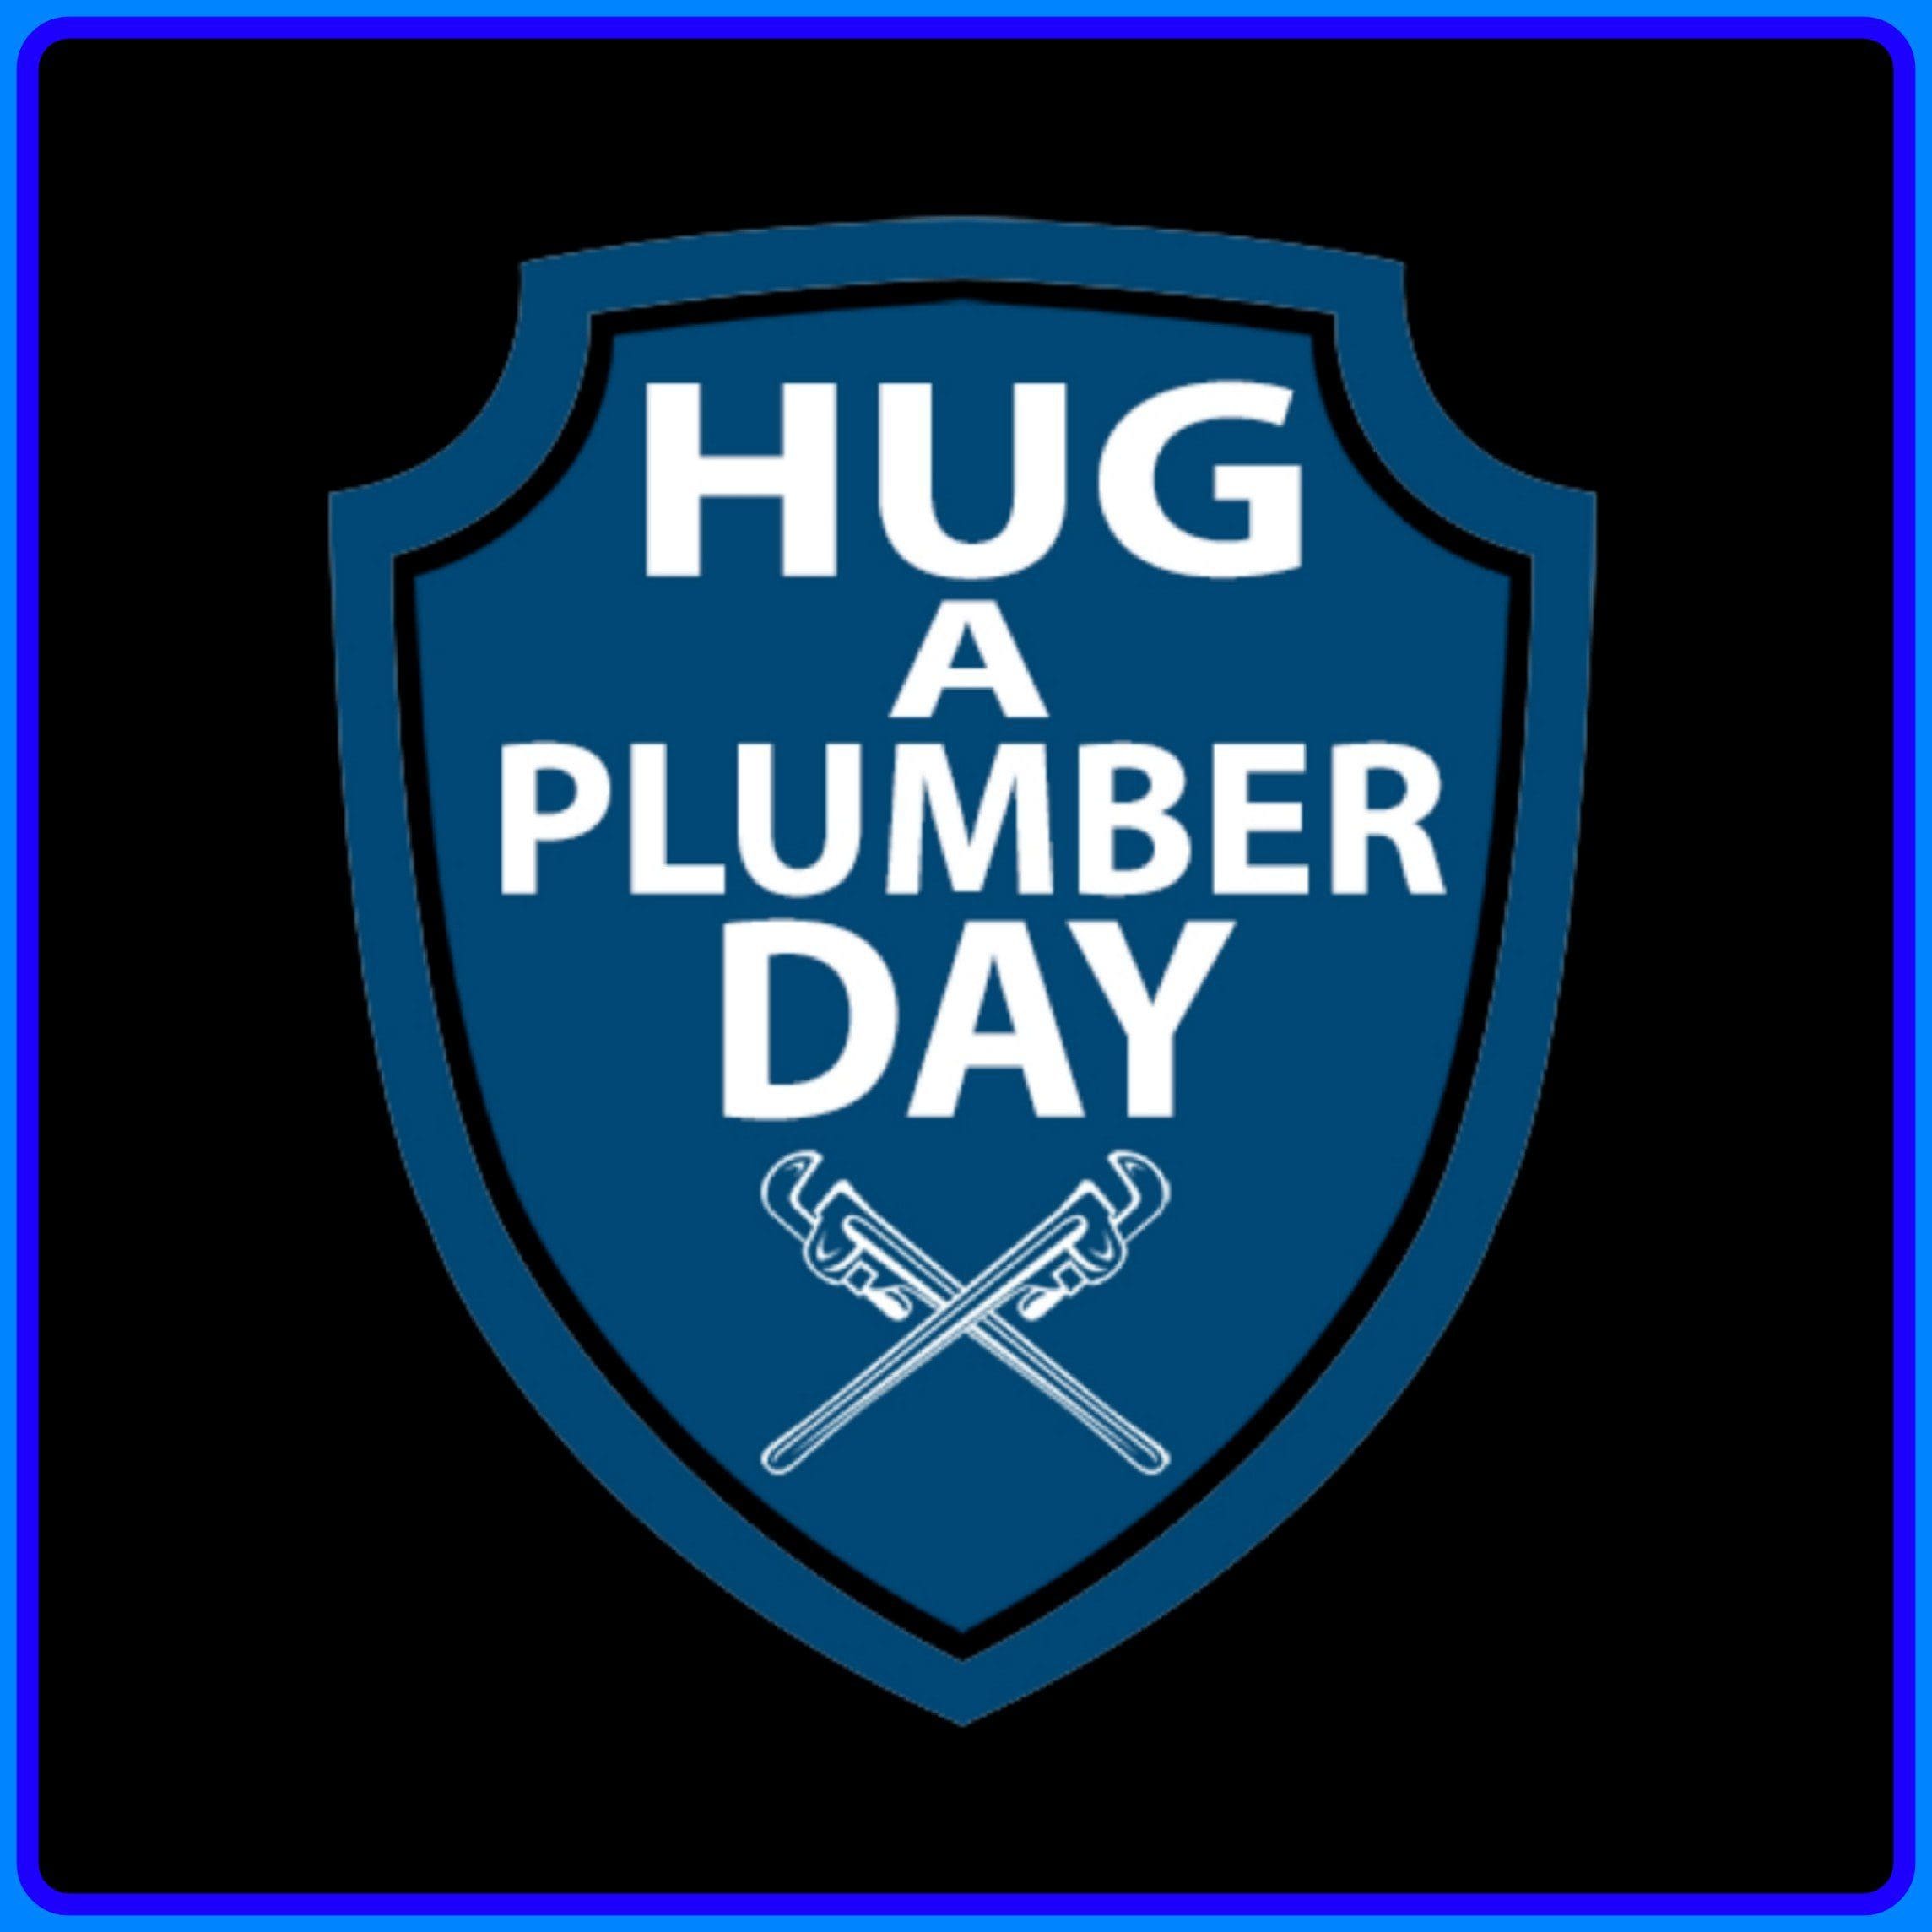 April 25th is National Hug a Plumber Day Plumbing Heating Cooling